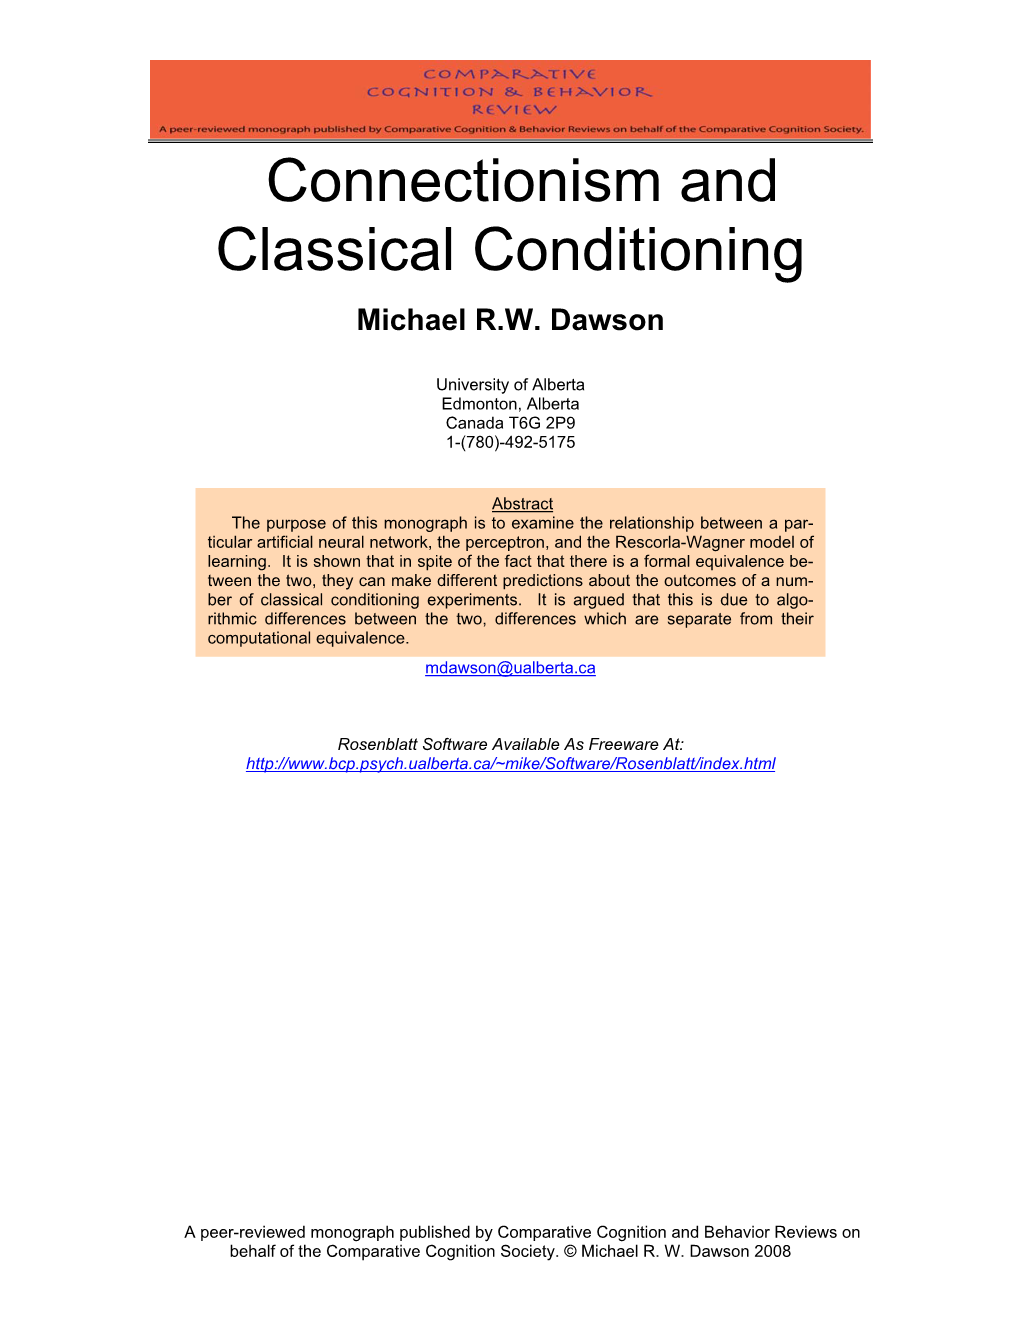 Connectionism and Classical Conditioning